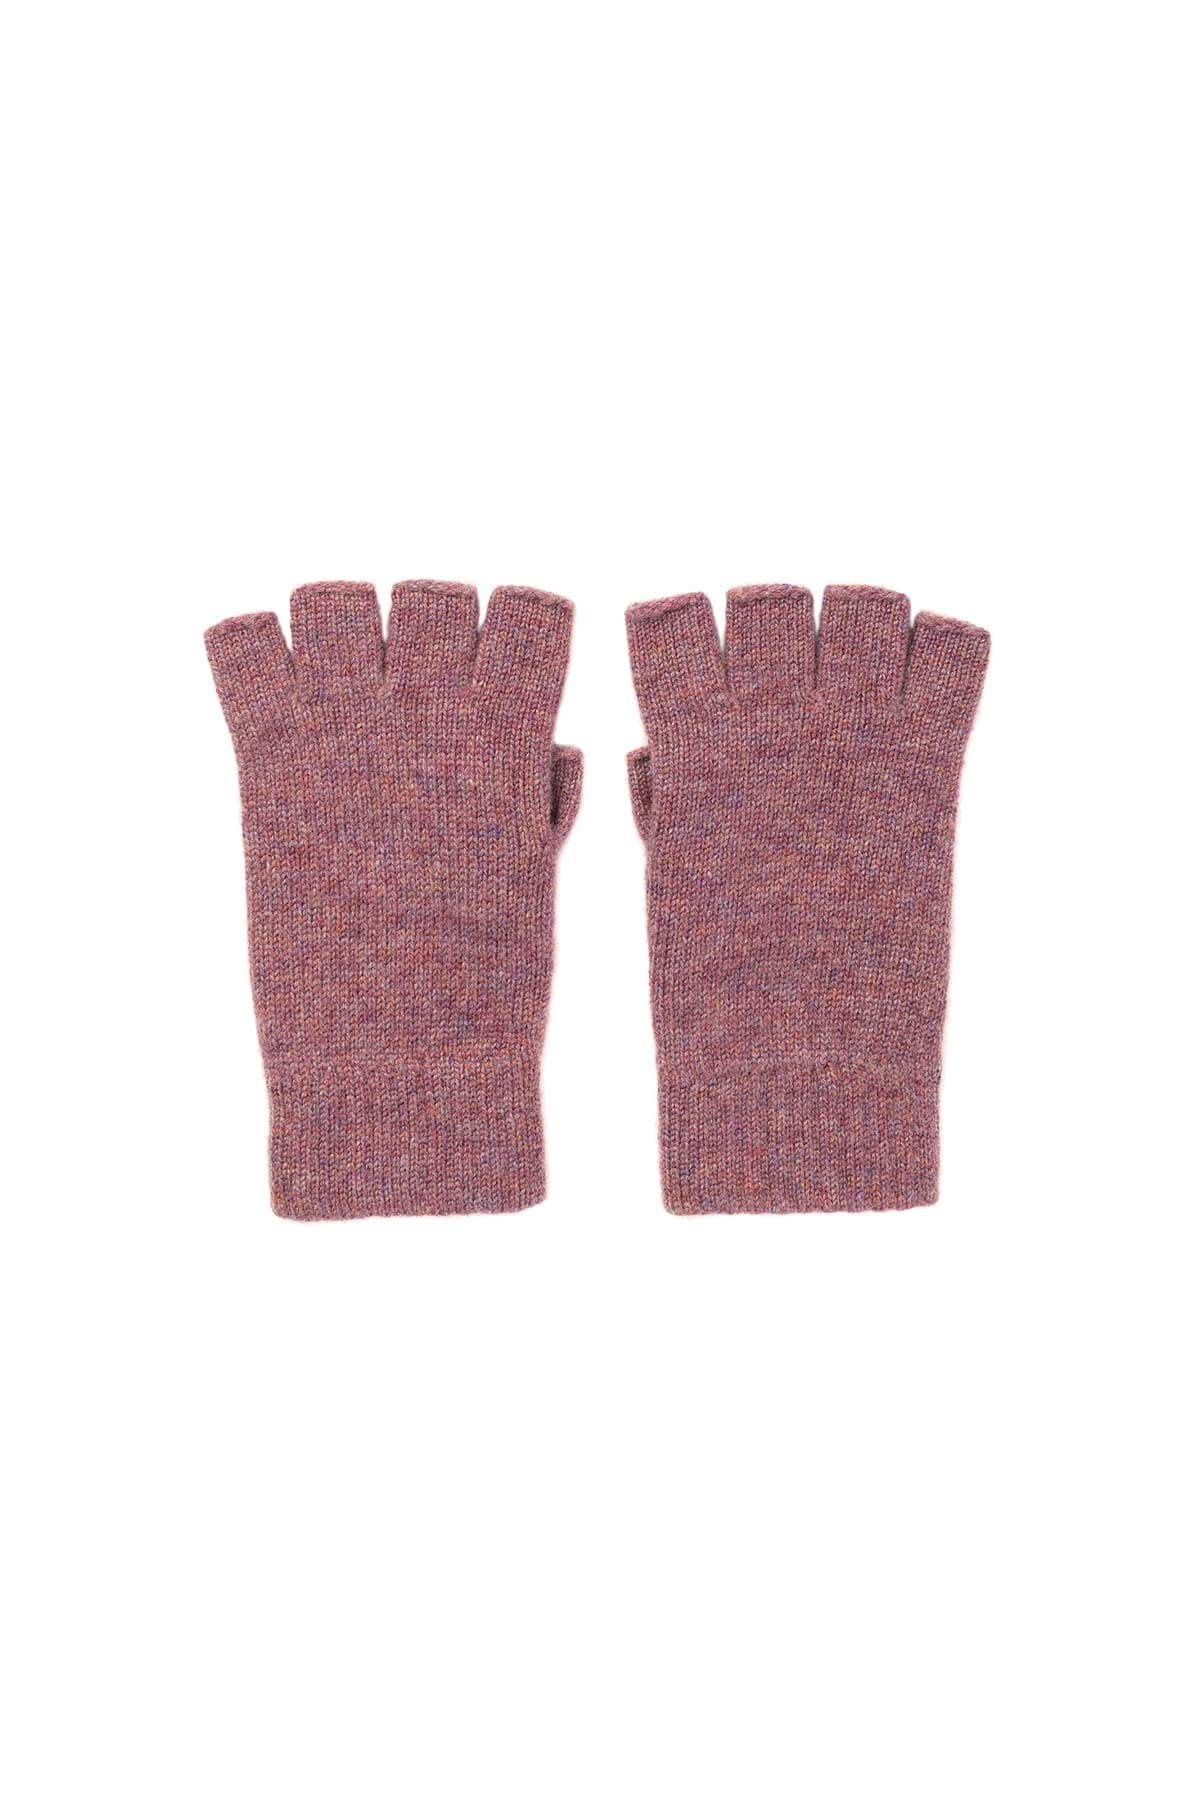 Johnstons of Elgin’s Heather pink Women's Fingerless Cashmere Gloves a white background HAY02223HE4307